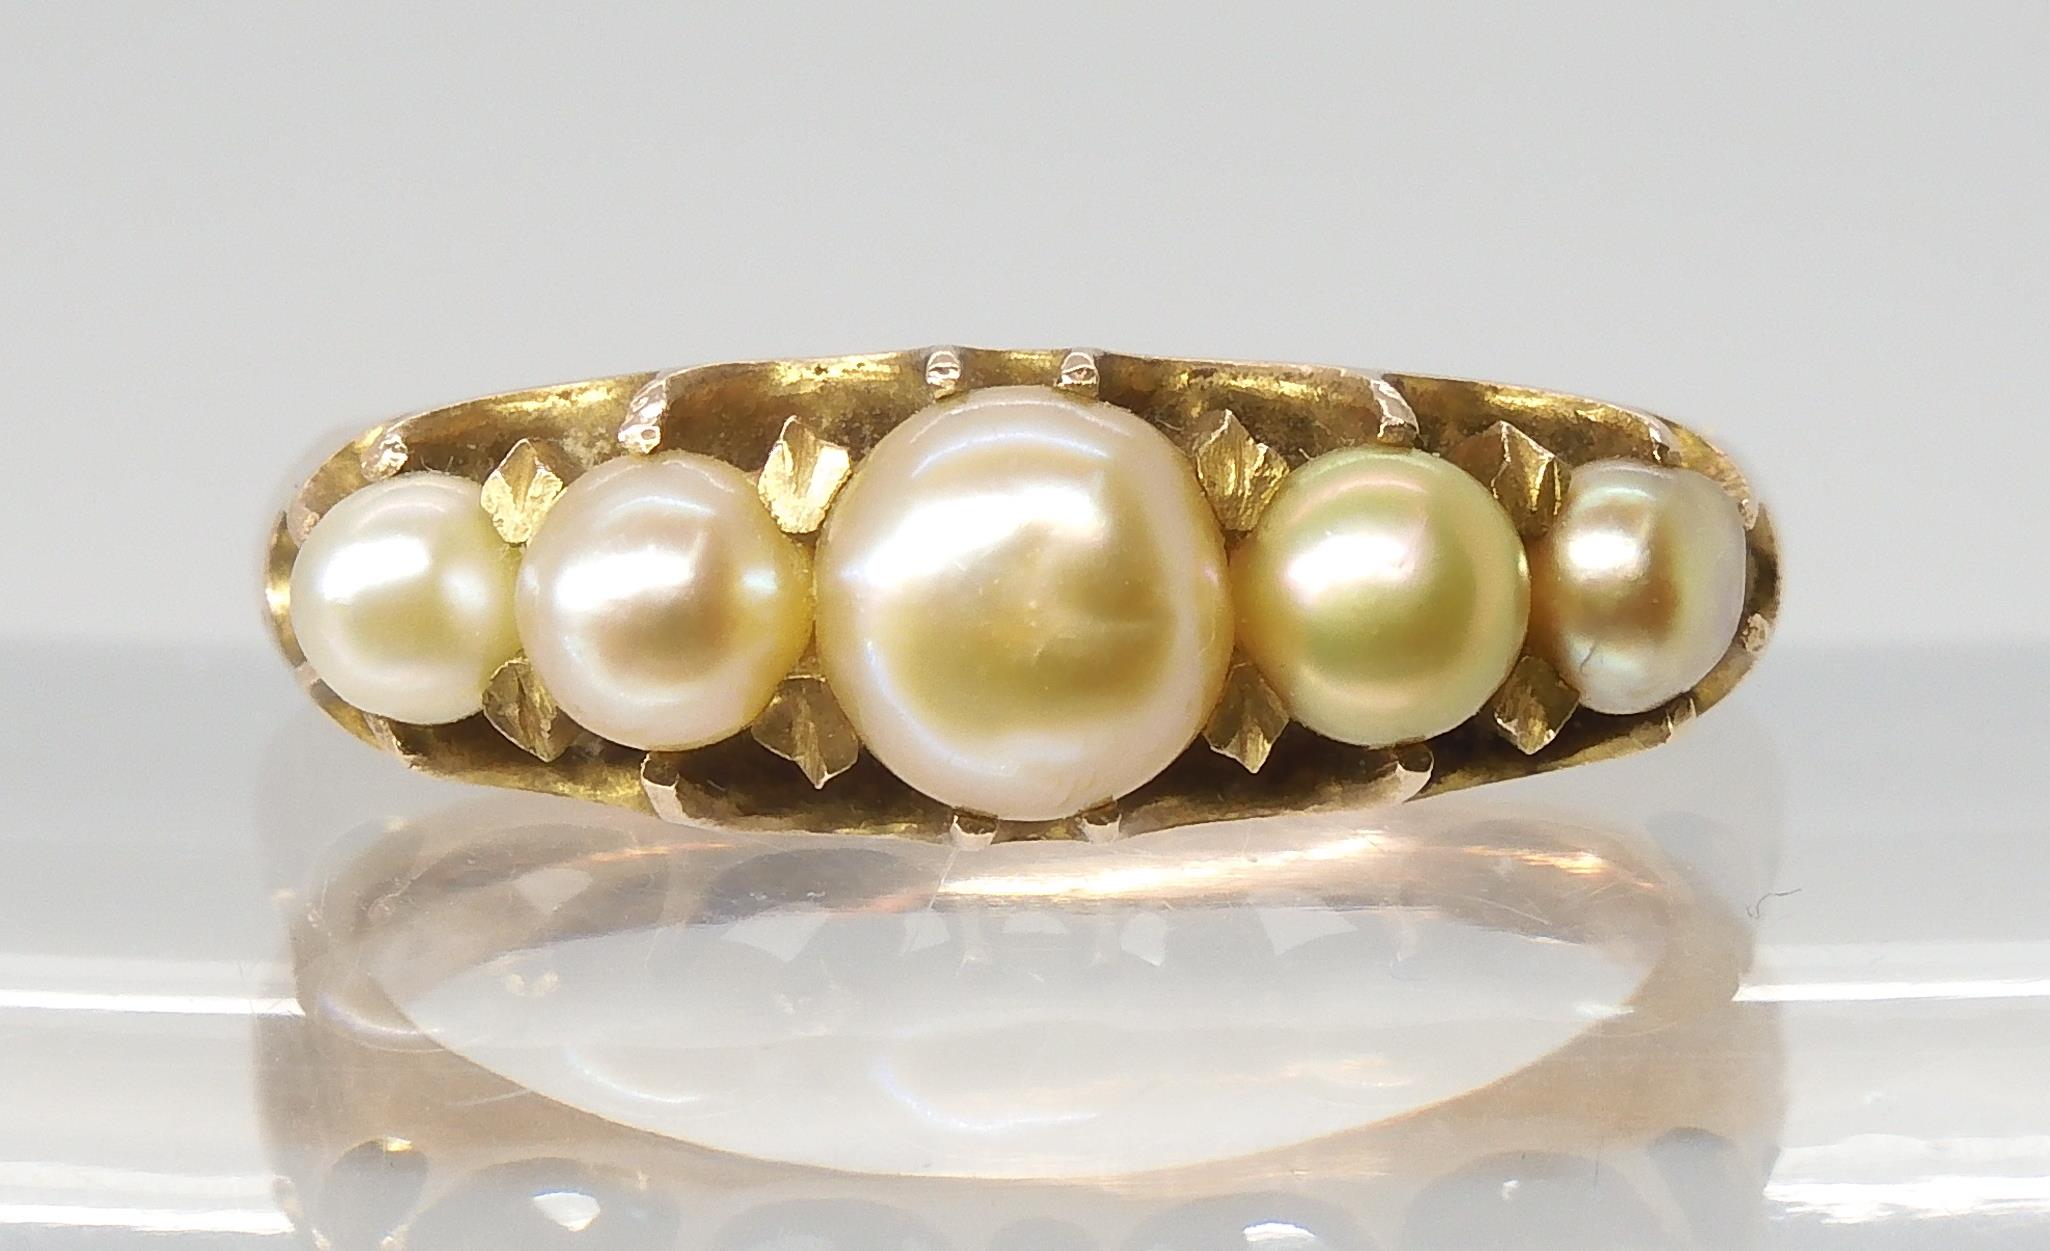 A VINTAGE PEARL RING set with five freeform cream pearls with good lustre, in a yellow metal